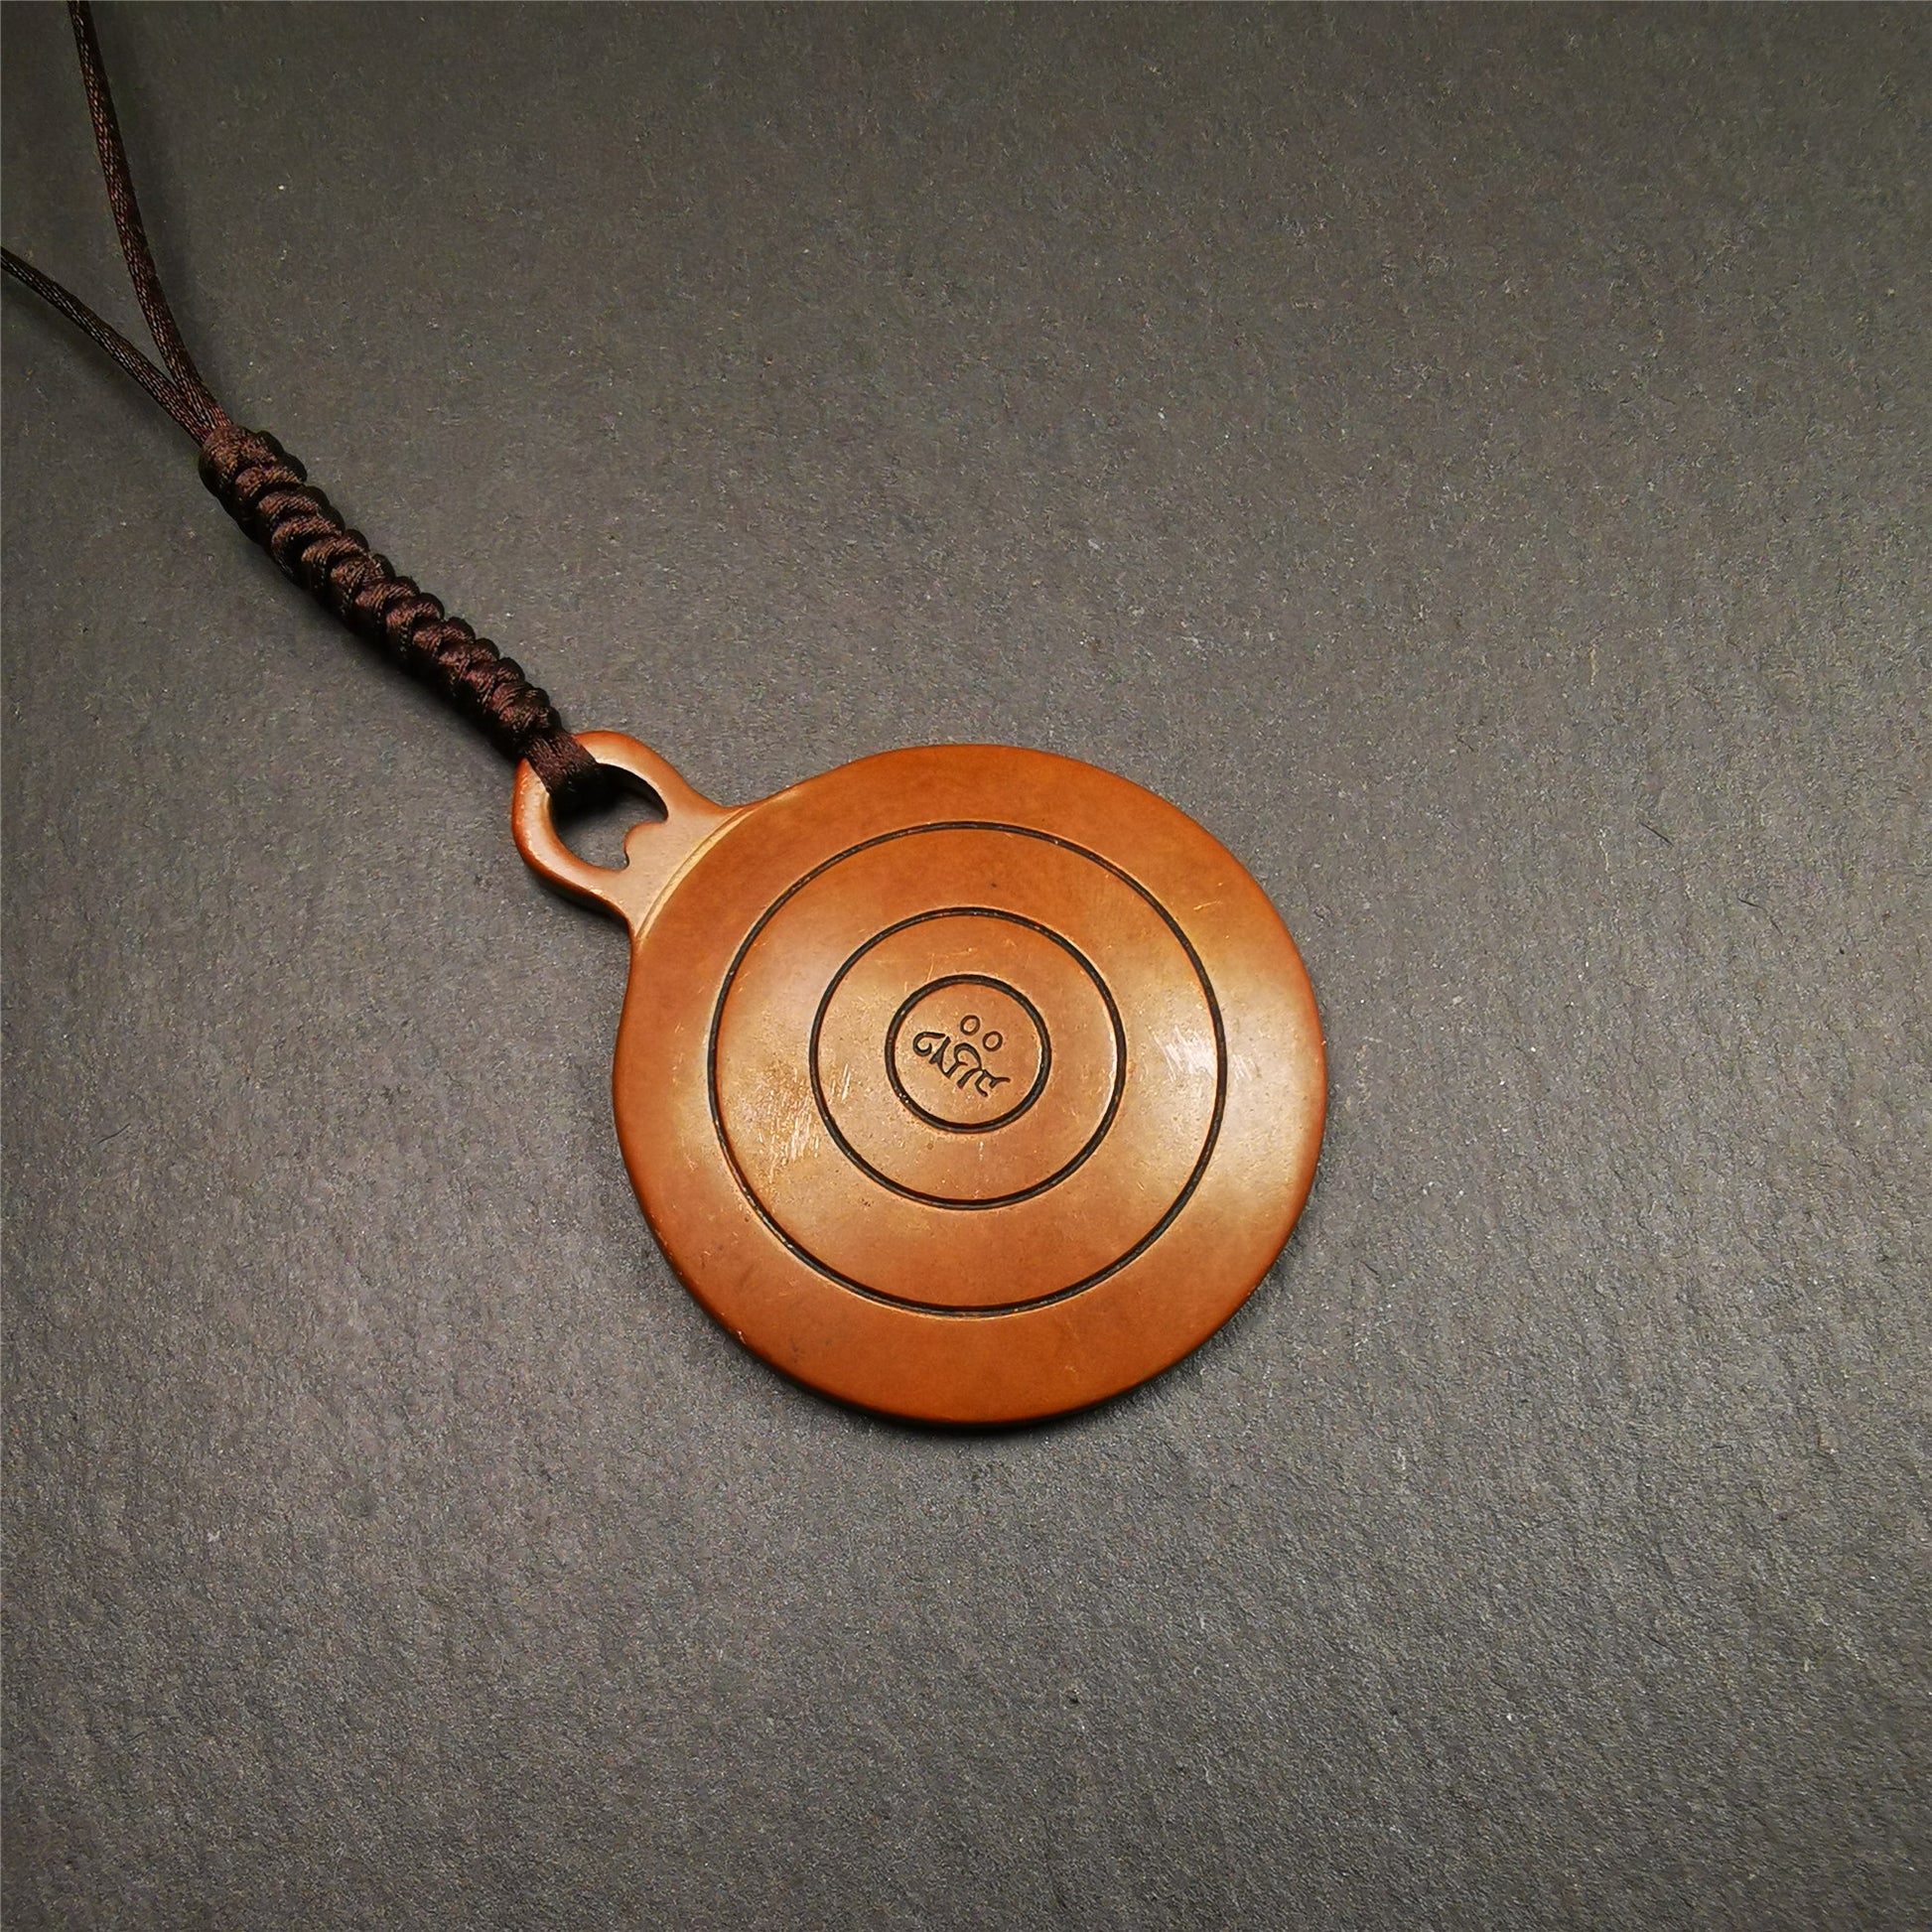 This OM badge amulet was collected from Jiegu Monastery Tibet.It is made of copper,diameter is 1.65 inches,Chenrezig is on the center, carved with Tibetan Letter ,Om Mani Padme Hum mantra,the letter on the back is Mind